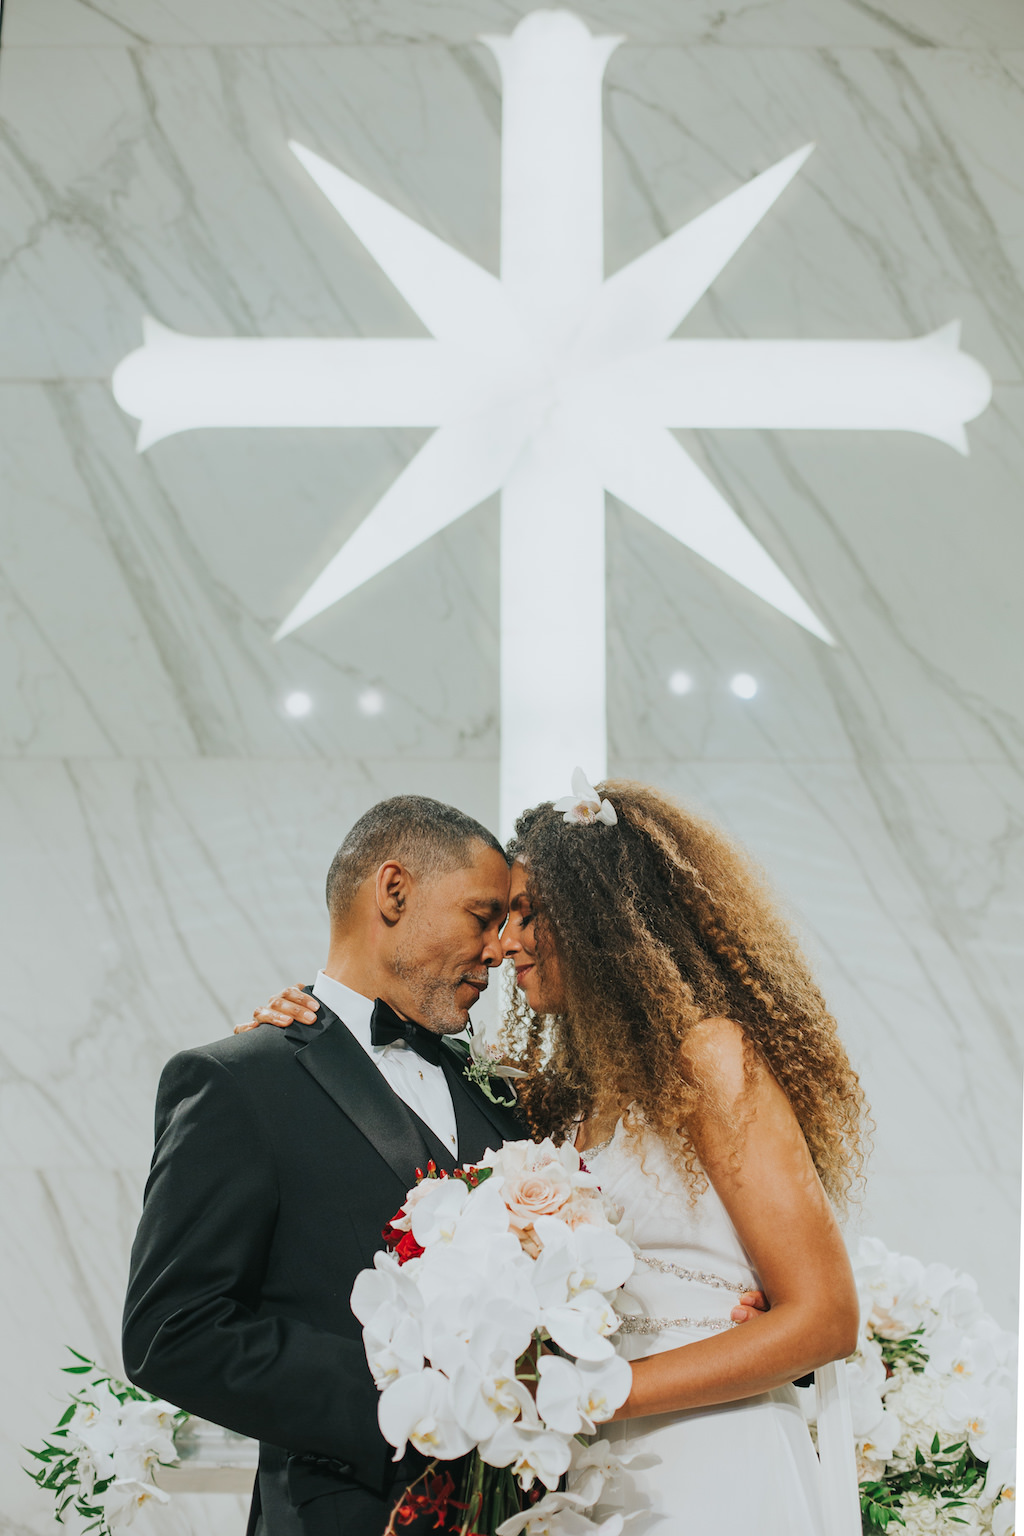 Clearwater Beach Church of Scientology Wedding Portrait, Bride with White Orchid and Red Floral Bouquet | Tampa Bay Wedding Photographer Brandi Image Photography